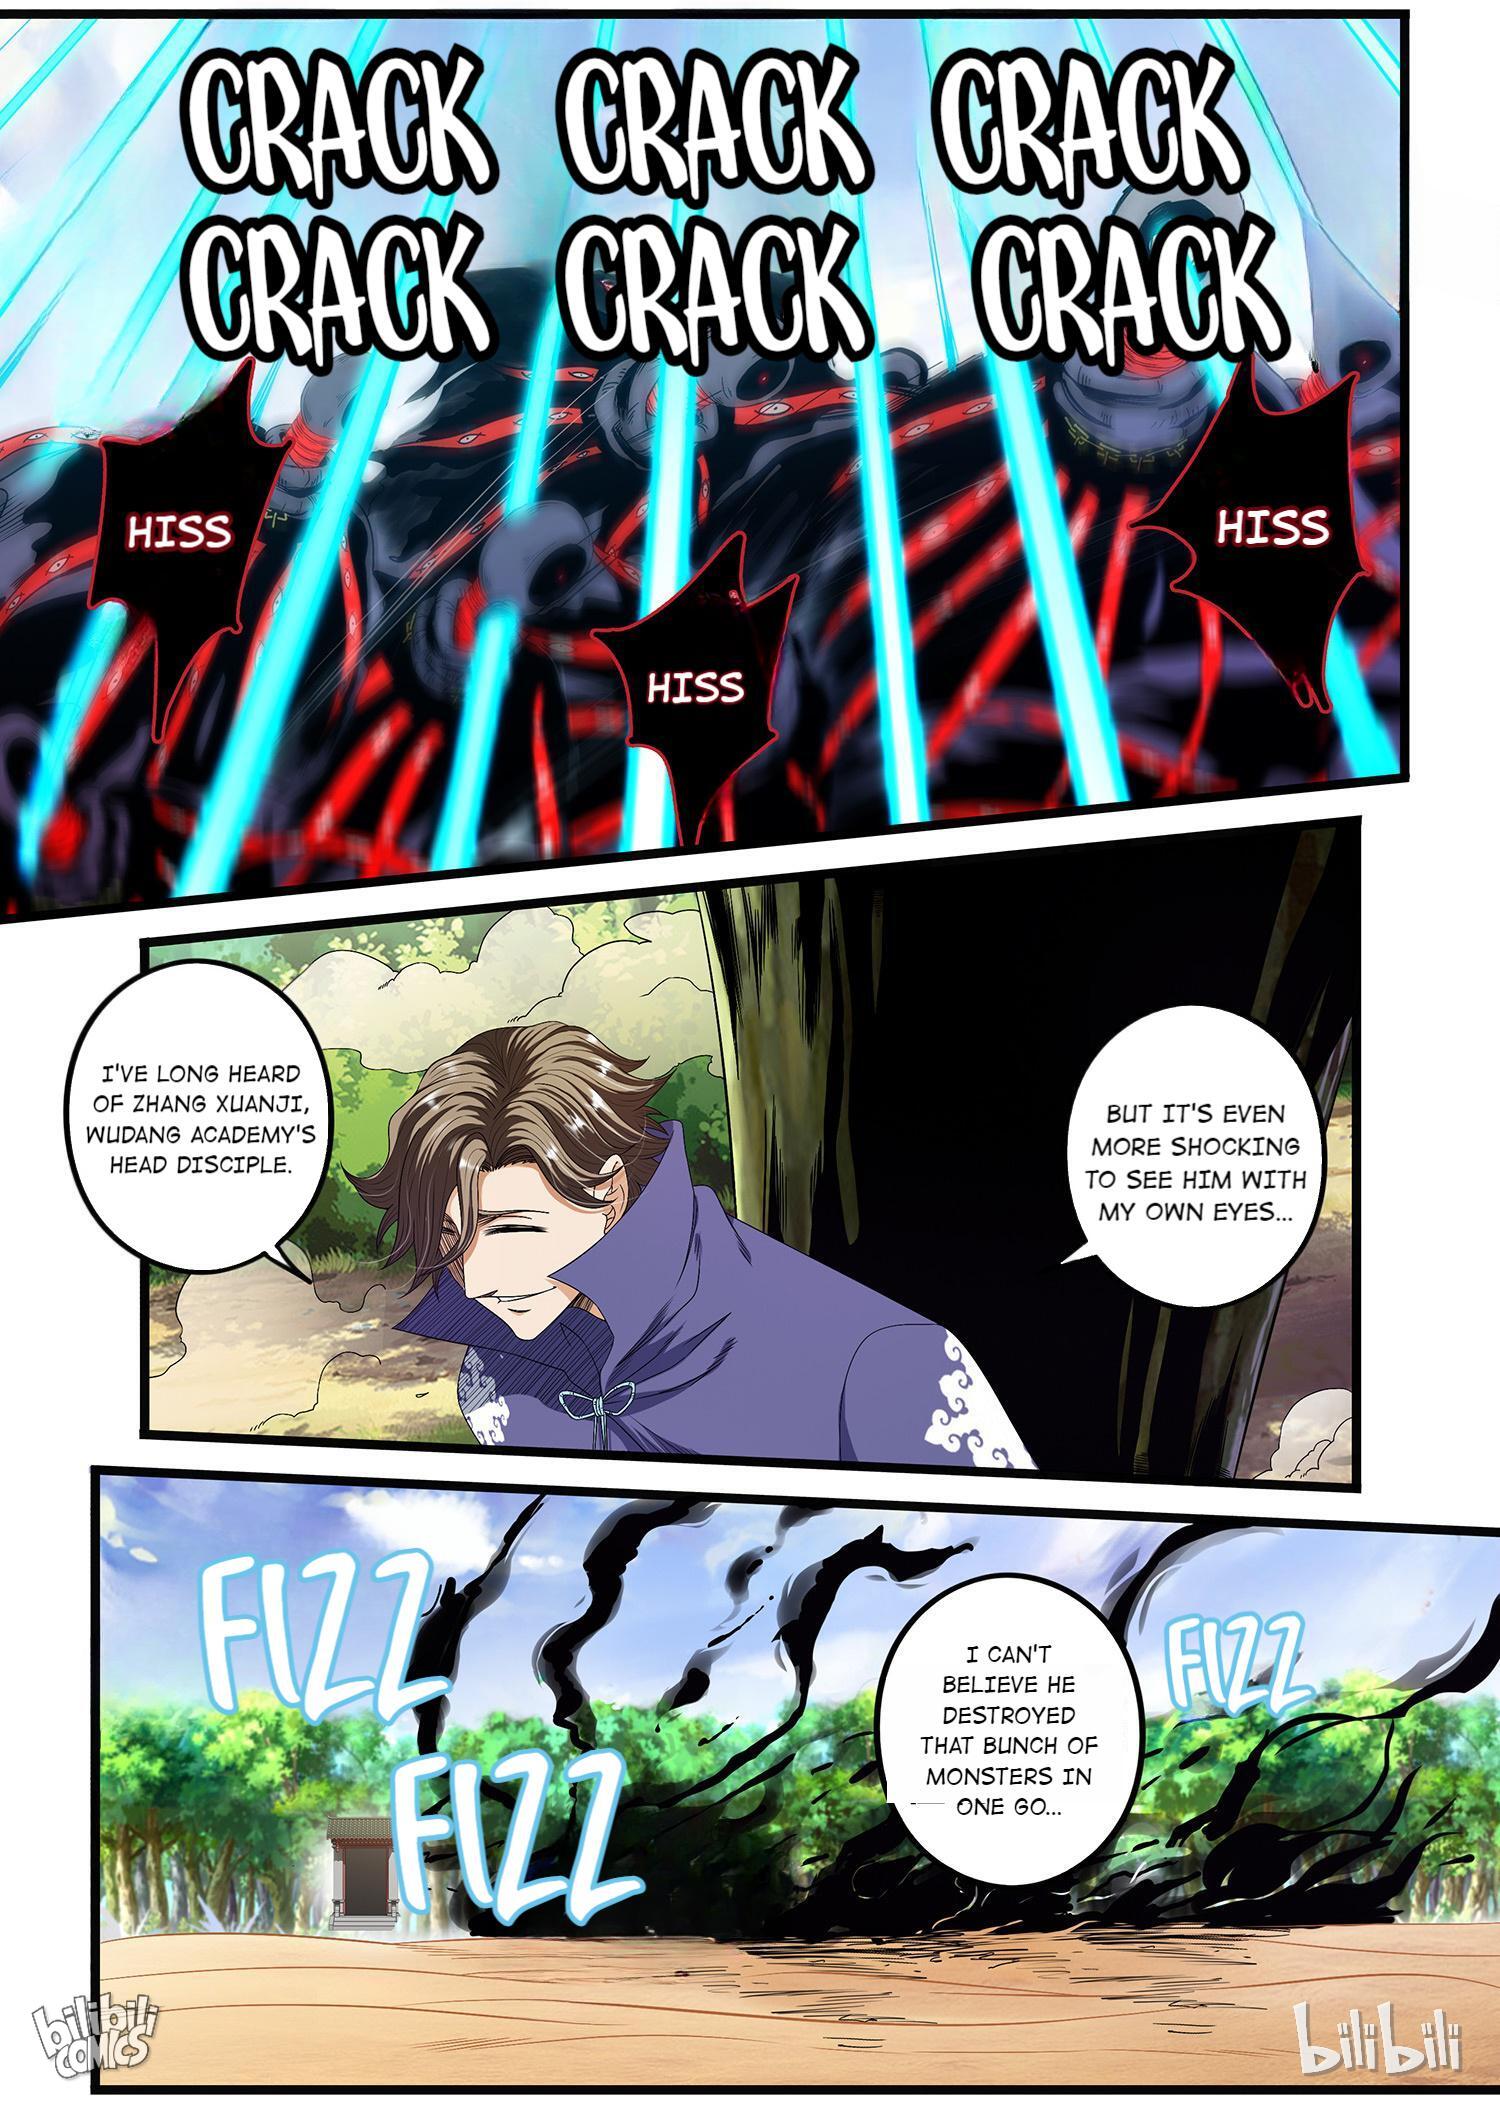 The Best Immortal Hero Academy - Page 2